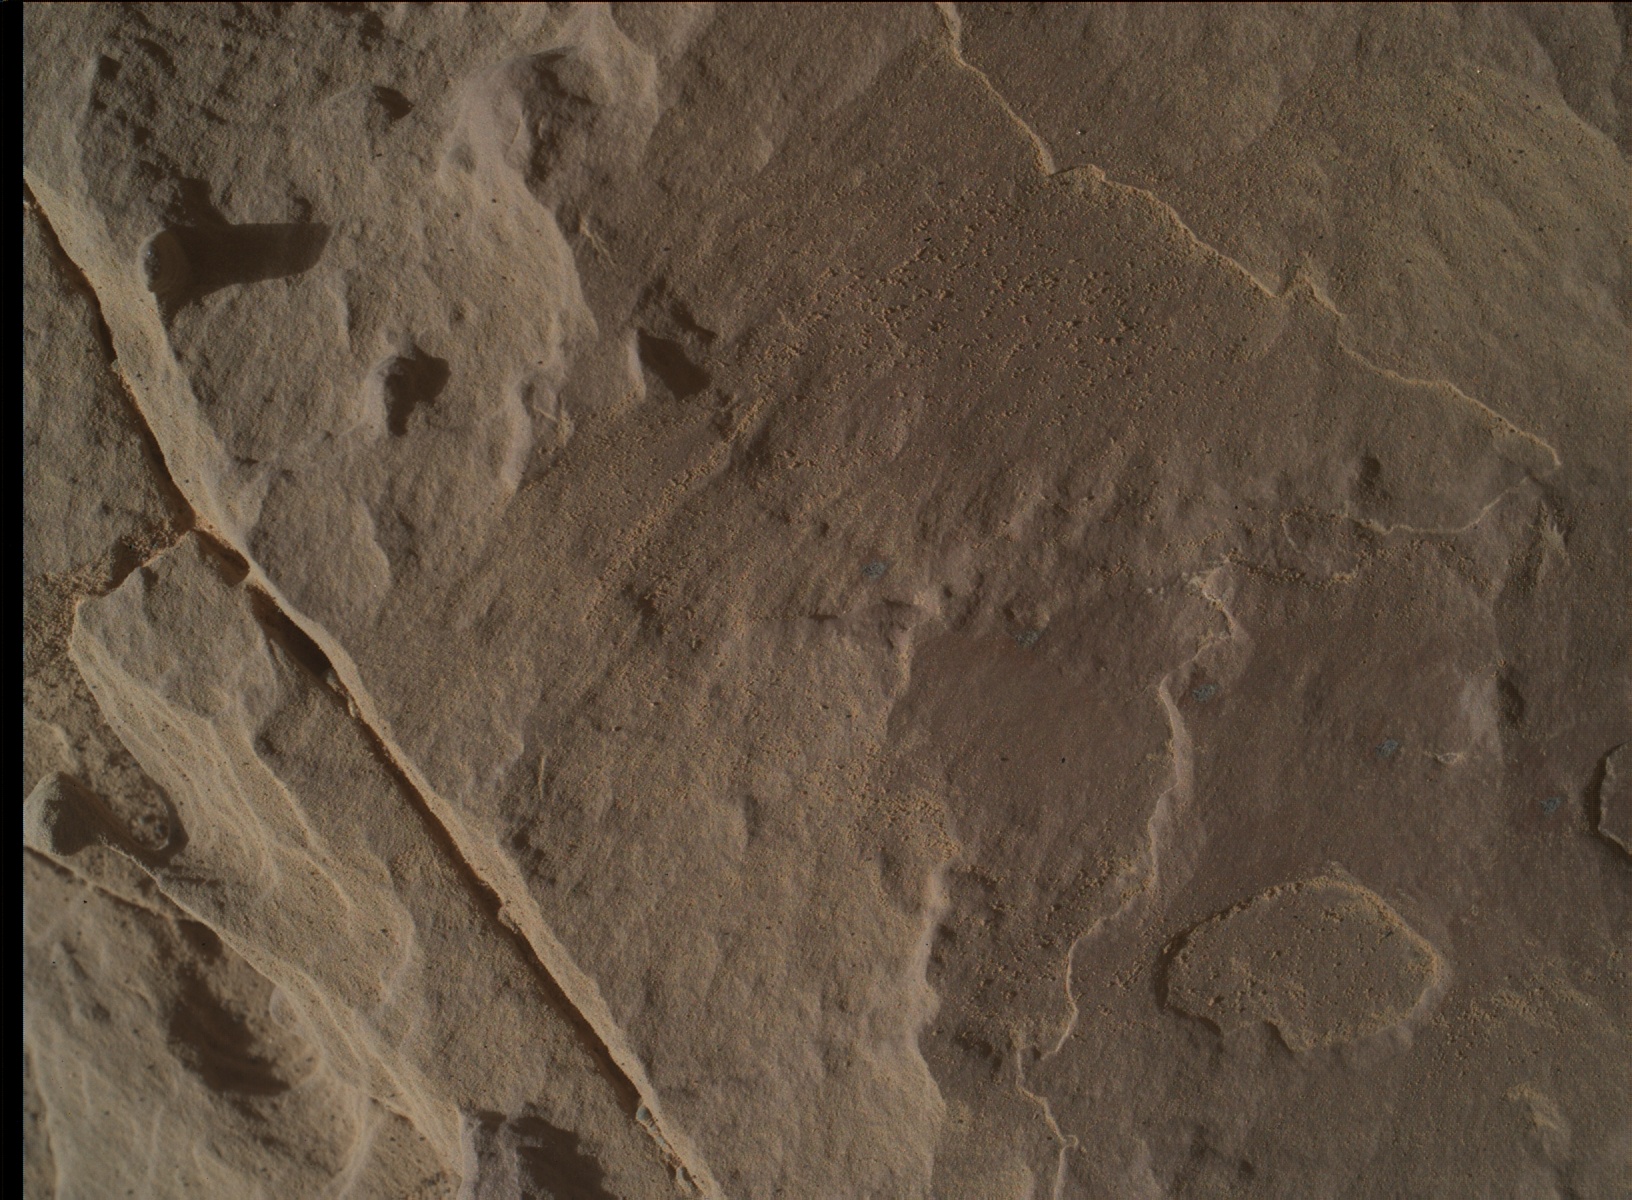 Nasa's Mars rover Curiosity acquired this image using its Mars Hand Lens Imager (MAHLI) on Sol 2001